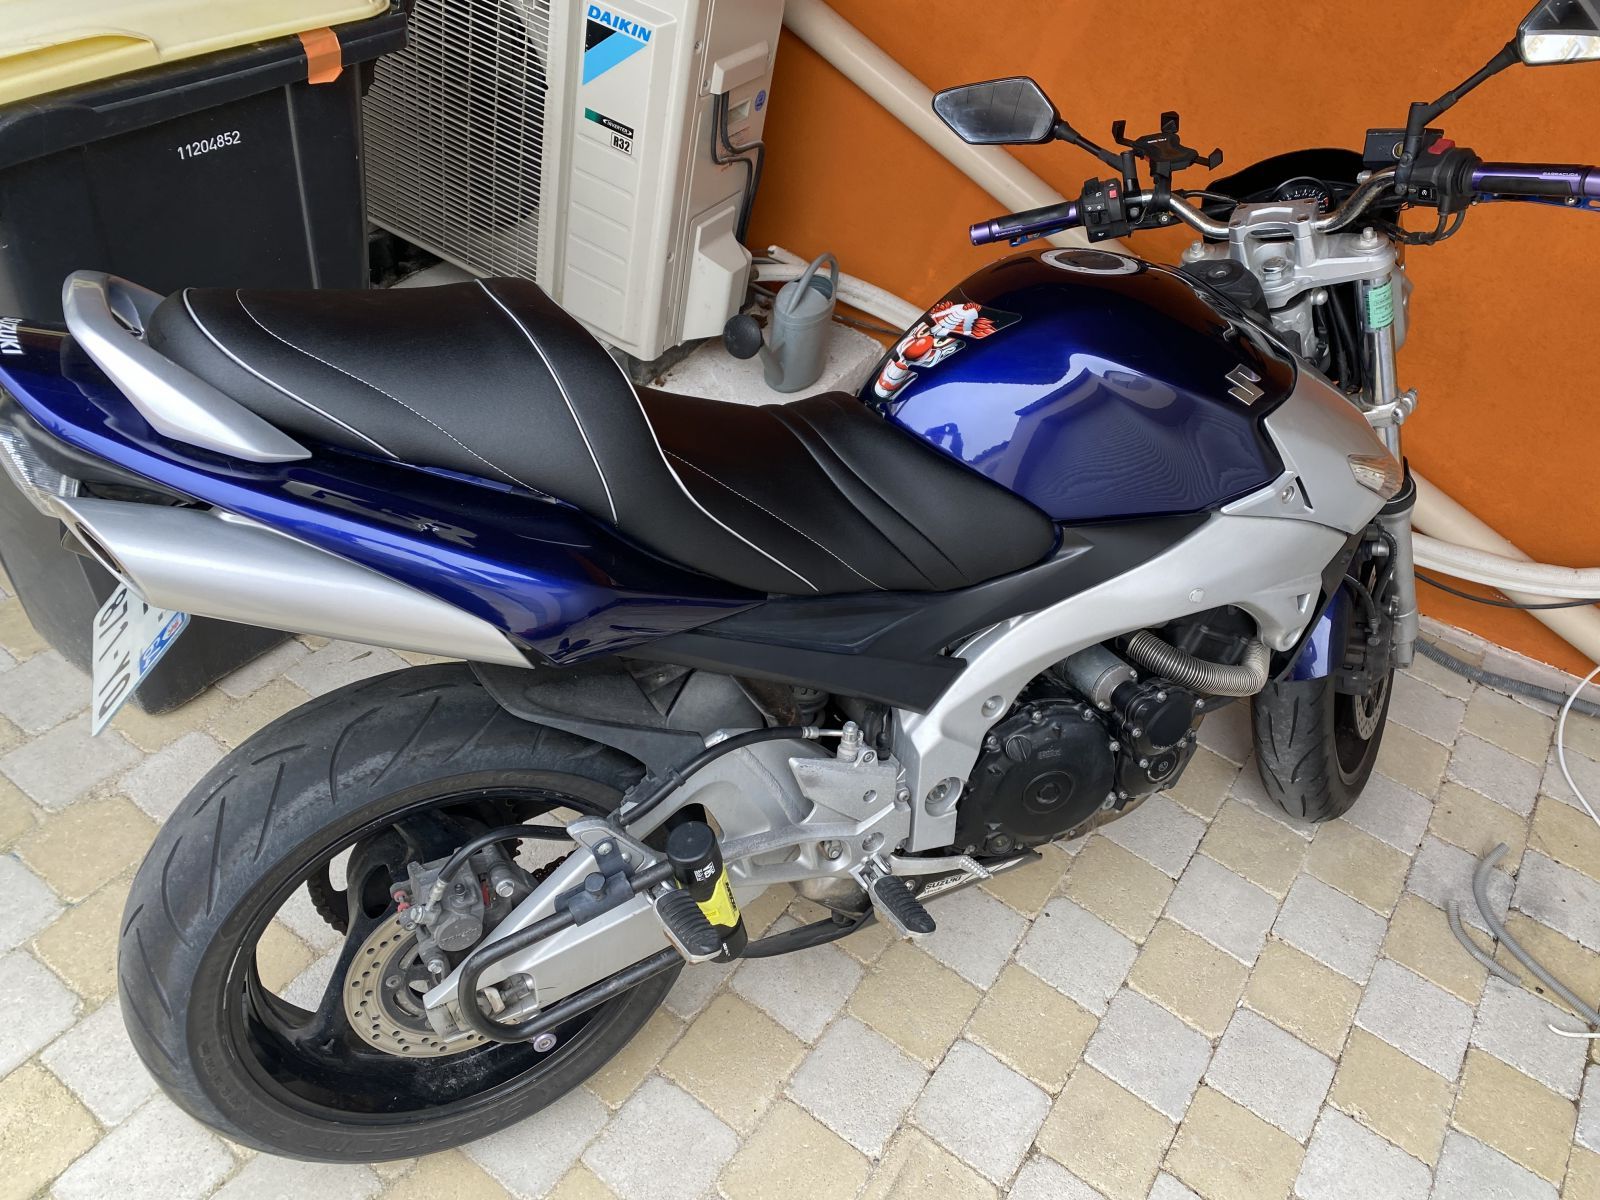 SUZUKI GSR 600 [>= 2006] - Deluxe seats, petrol tank covers, tank bags  [Rates for: FRANCE]